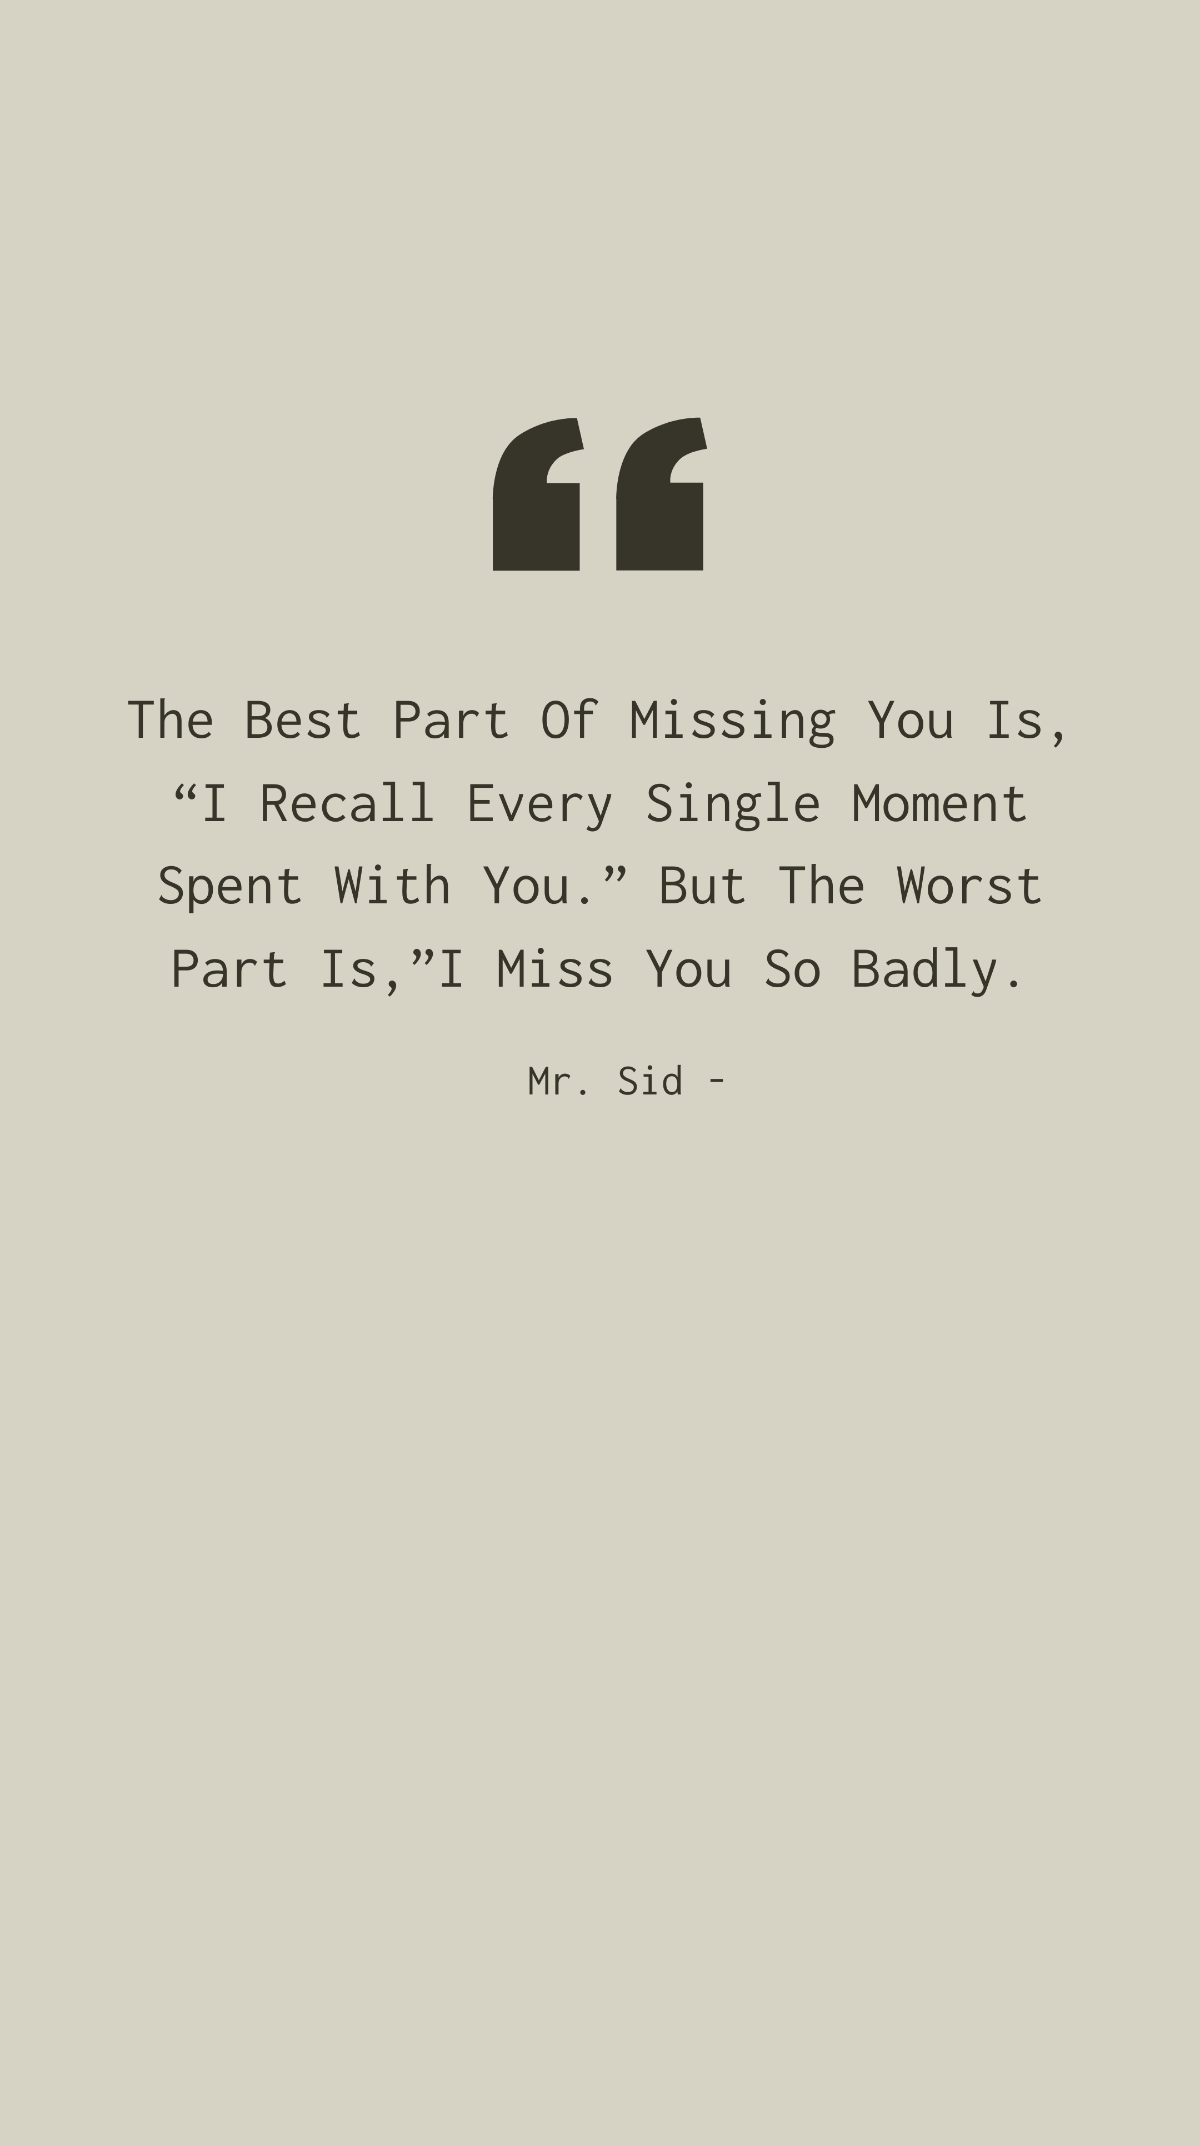 Free Mr. Sid - The Best Part Of Missing You Is, “I Recall Every Single Moment Spent With You.” But The Worst Part Is,”I Miss You So Badly. Template